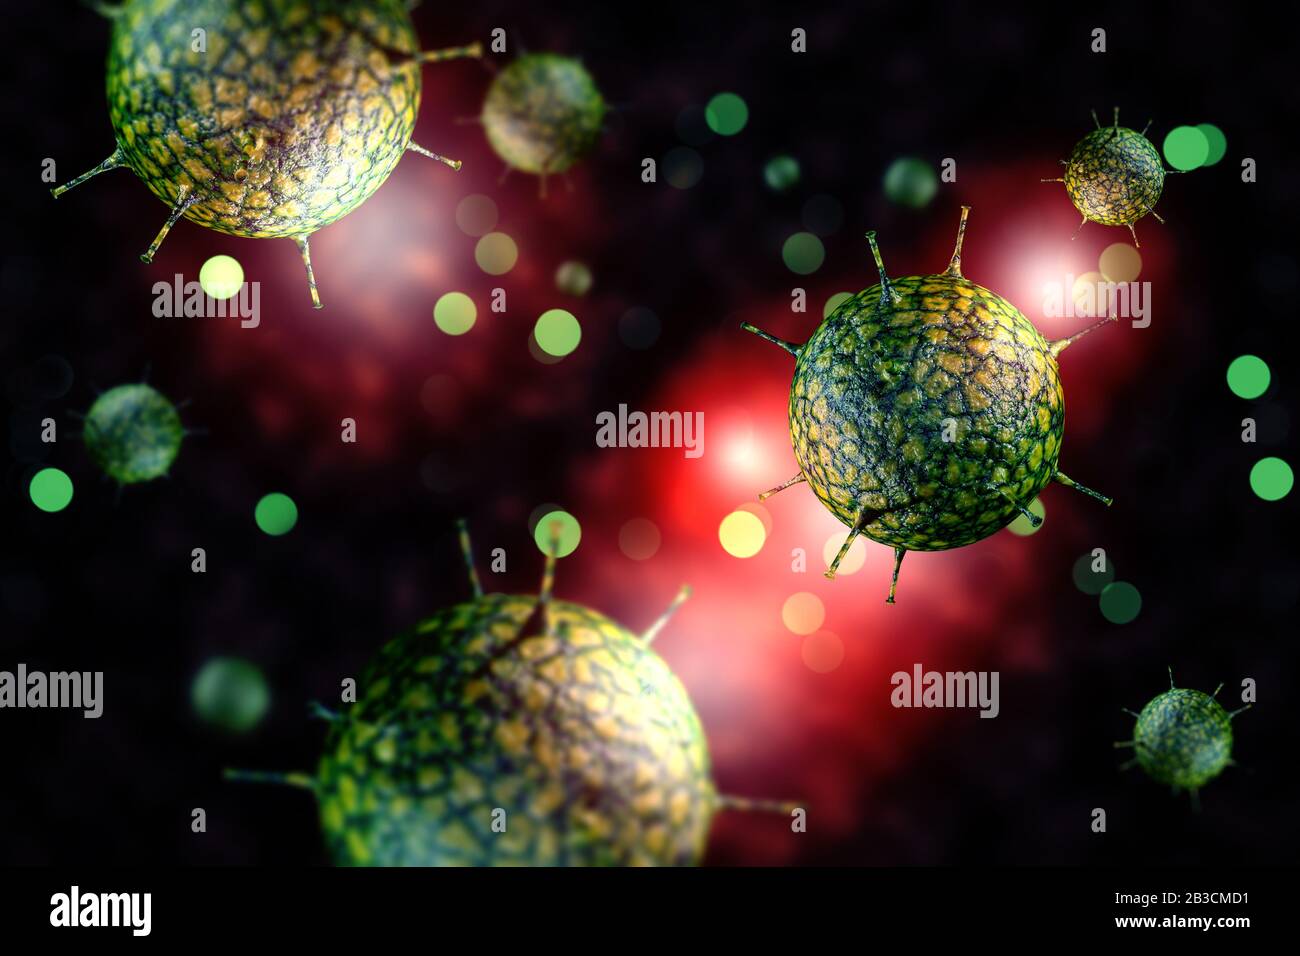 Infectious disease rhino virus common cold cell conceptual 3D illustration Stock Photo